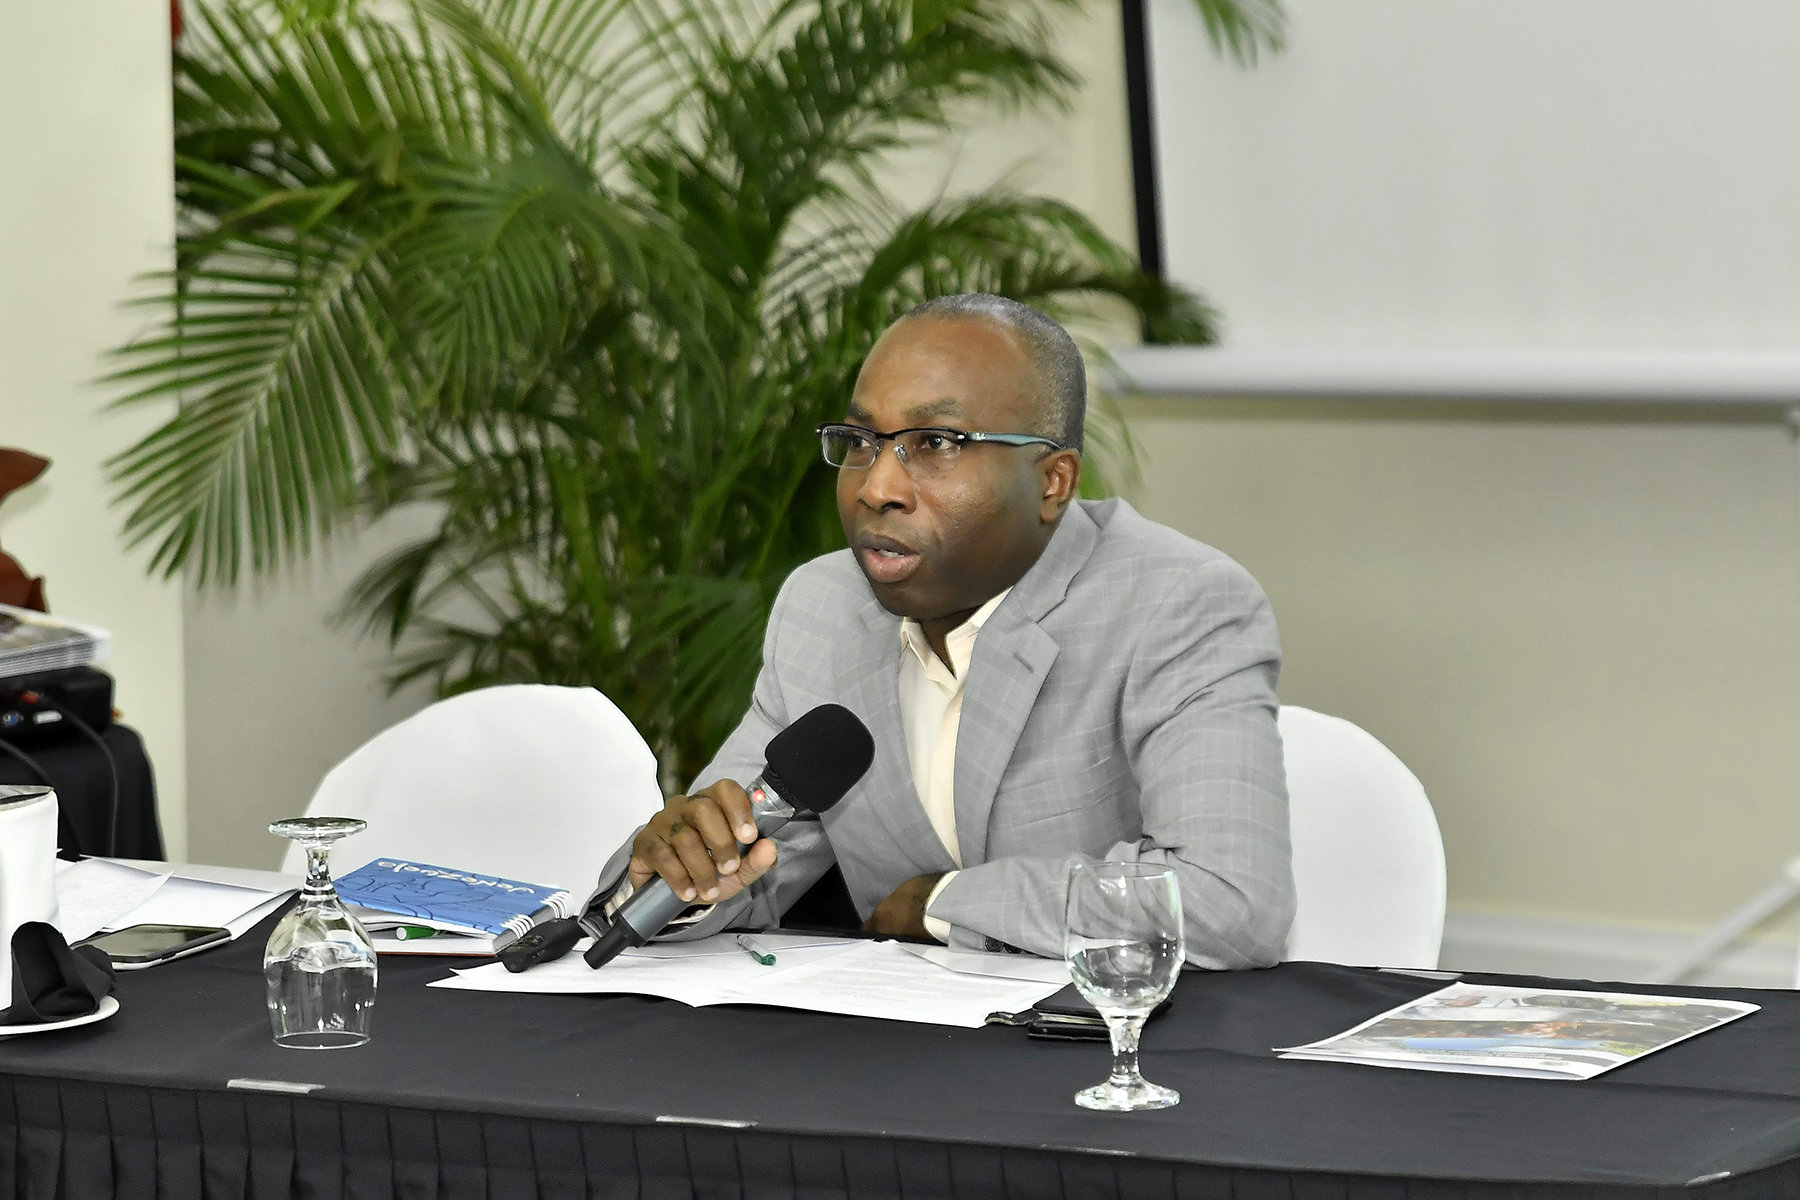 Dr. Yves Robert Personna, who delivered a presentation on the NDRM programme highlighting ongoing activities to include support given to countries.